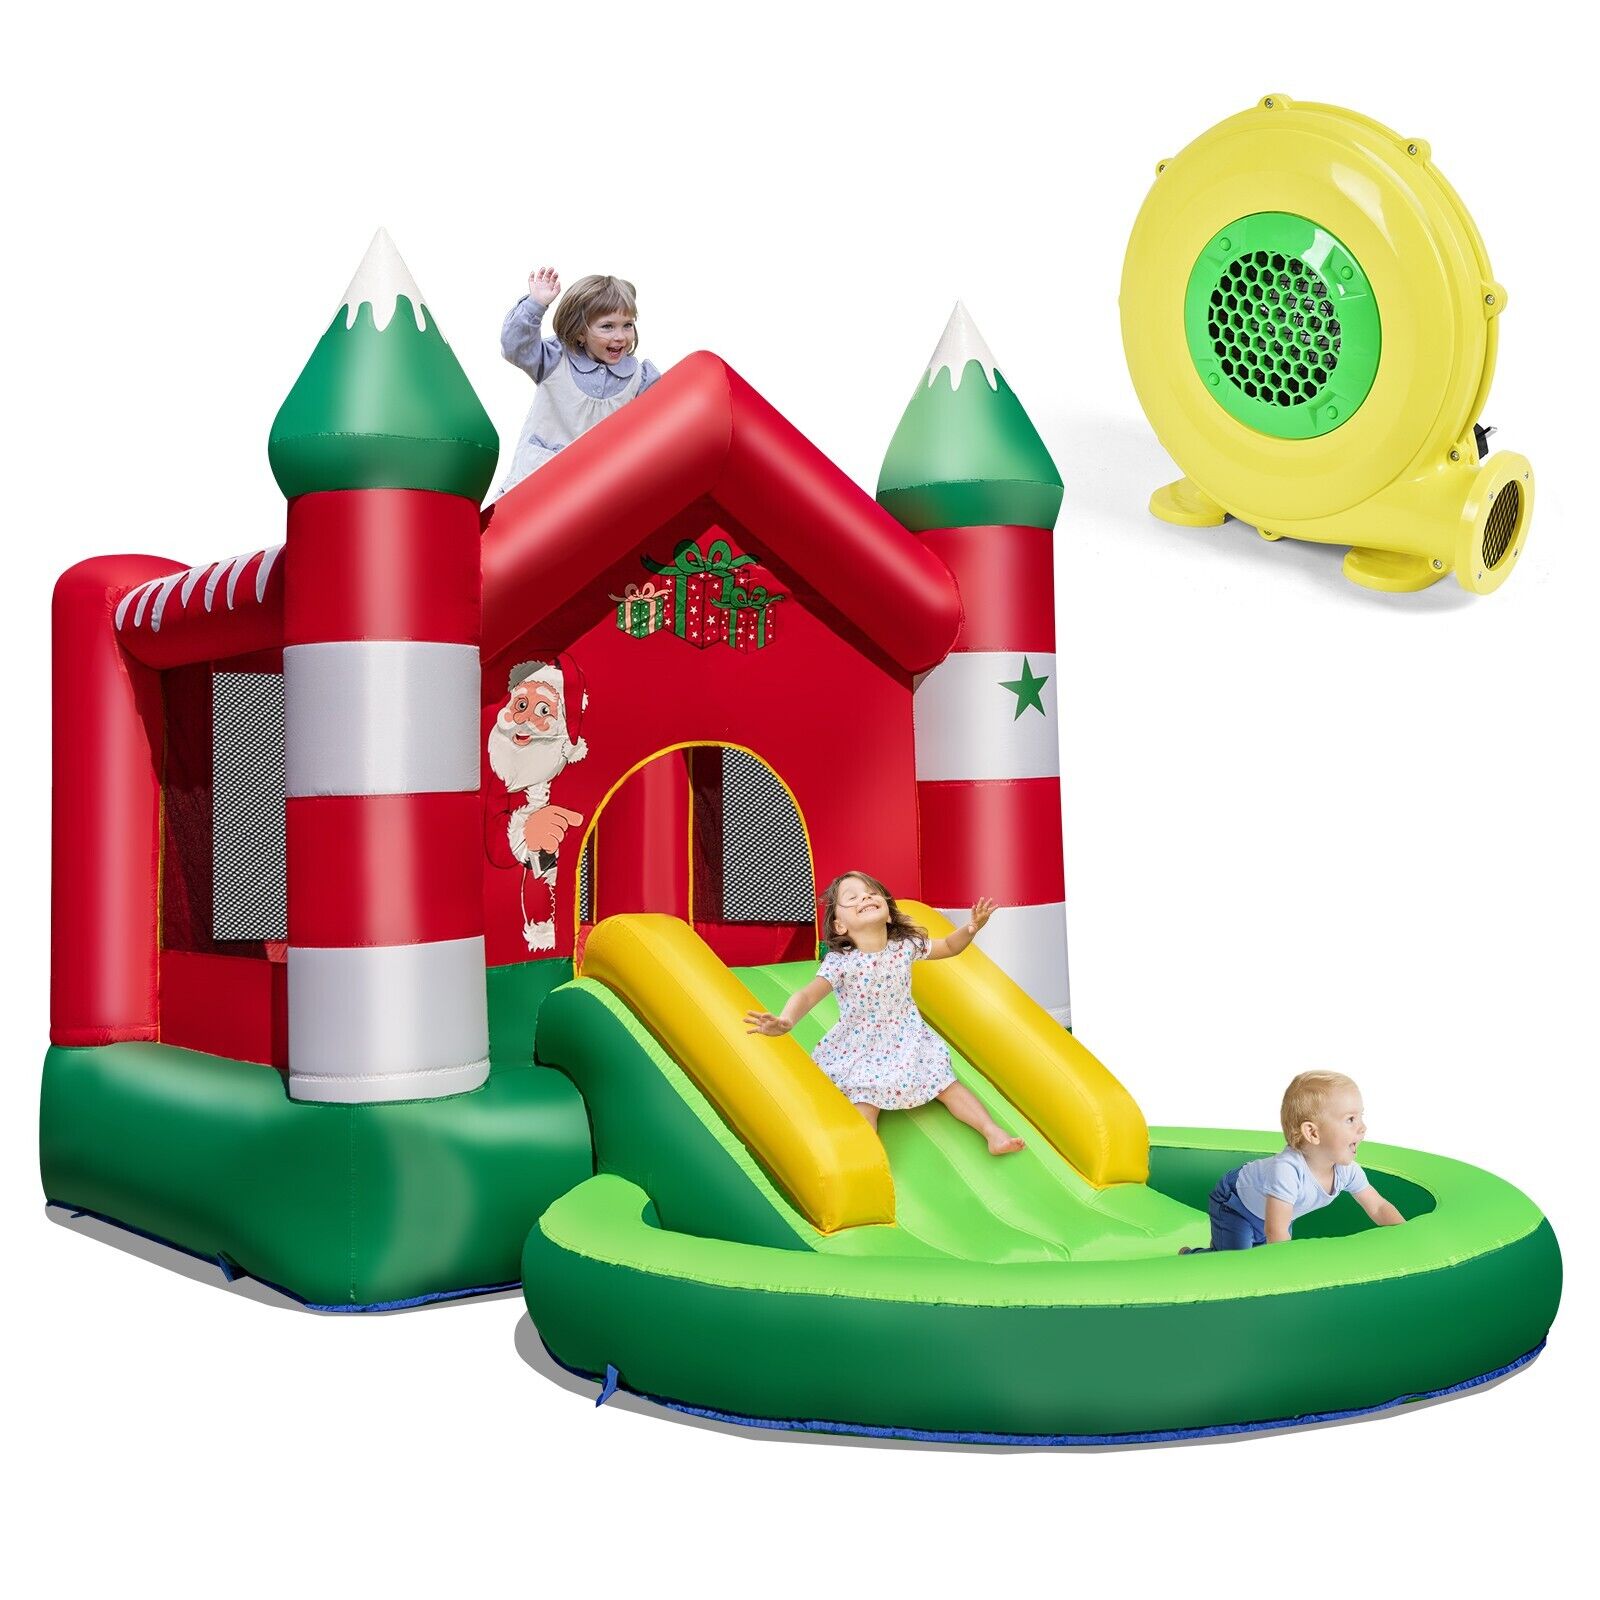 Inflatable Bounce House with Slide Trampoline and Round Ball Pit Pool